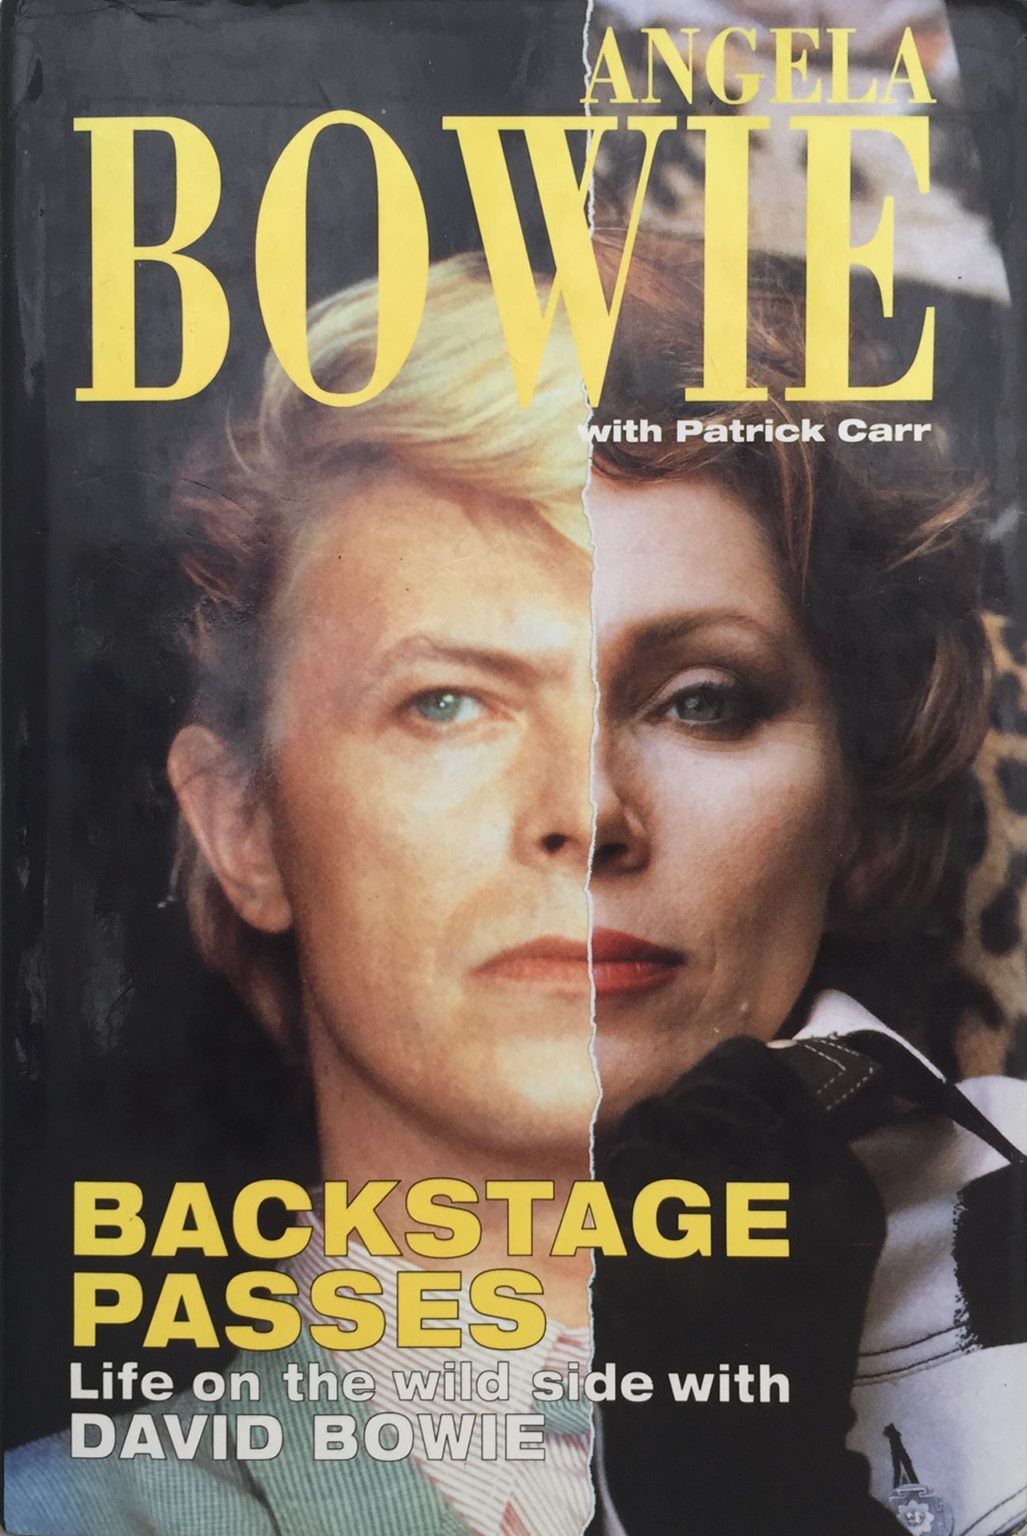 BACKSTAGE PASSES: Life On The Wild Side With David Bowie